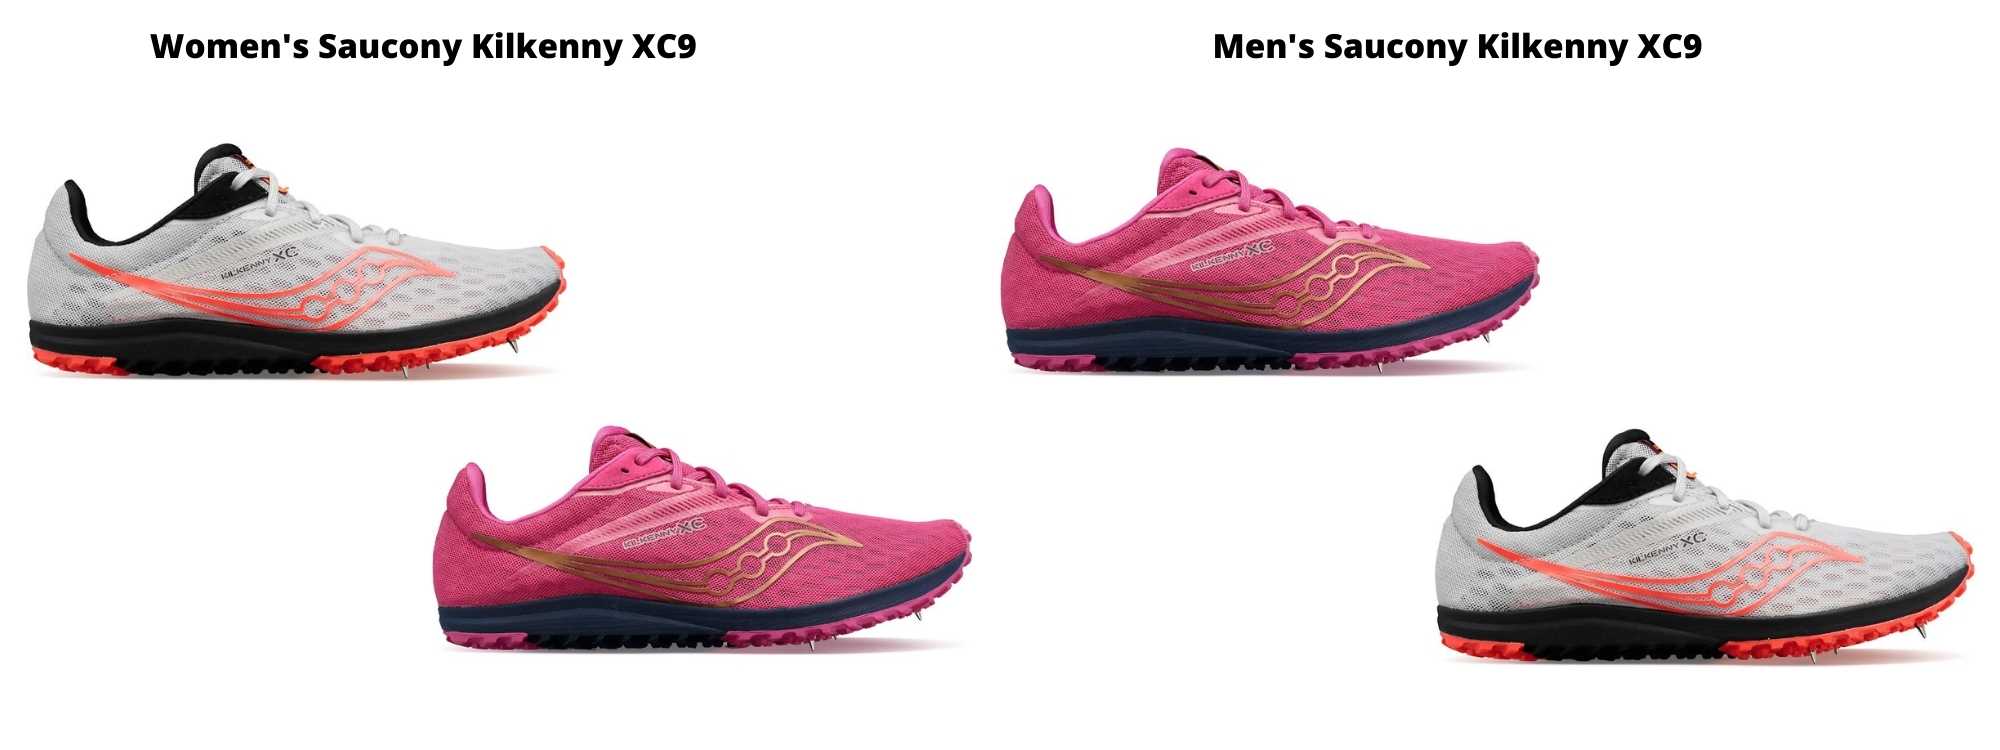 Saucony Kilkenny XC9 spike can be purchased in Kansas City